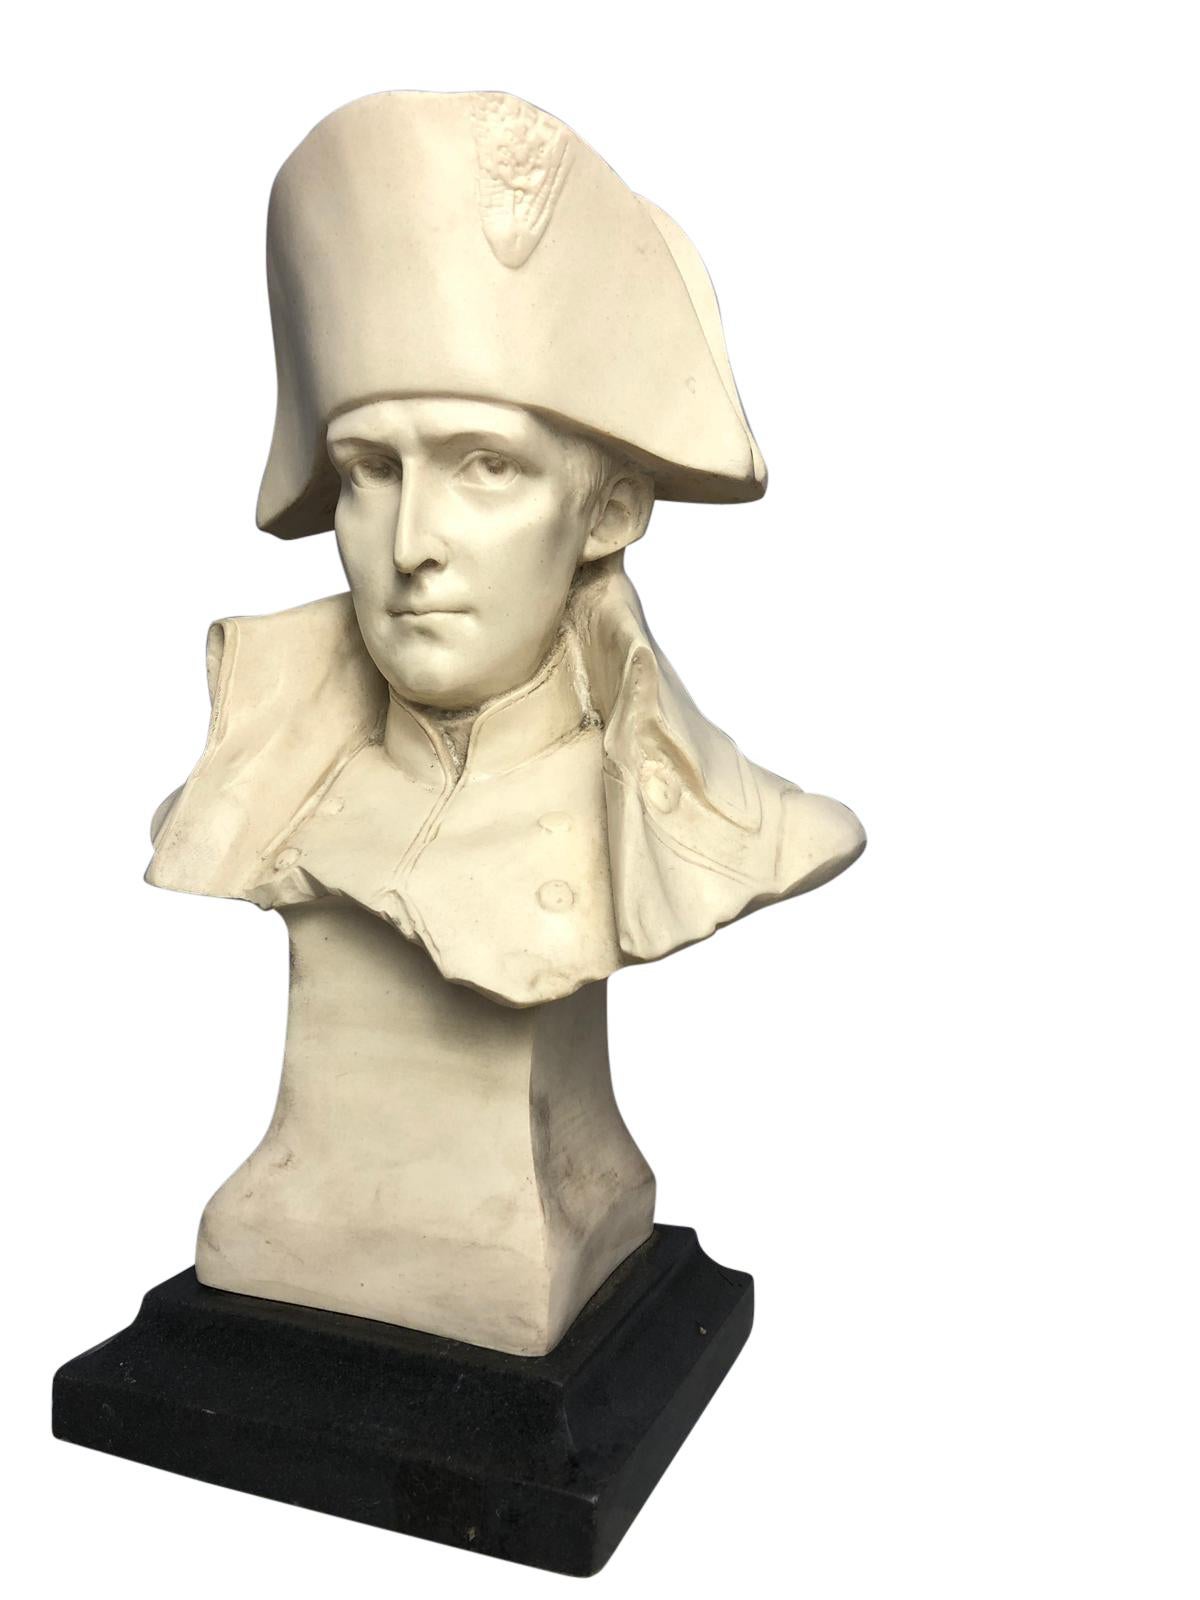 Composition Napoleon Bust, French Emperor I Bonaparte Military, Signed